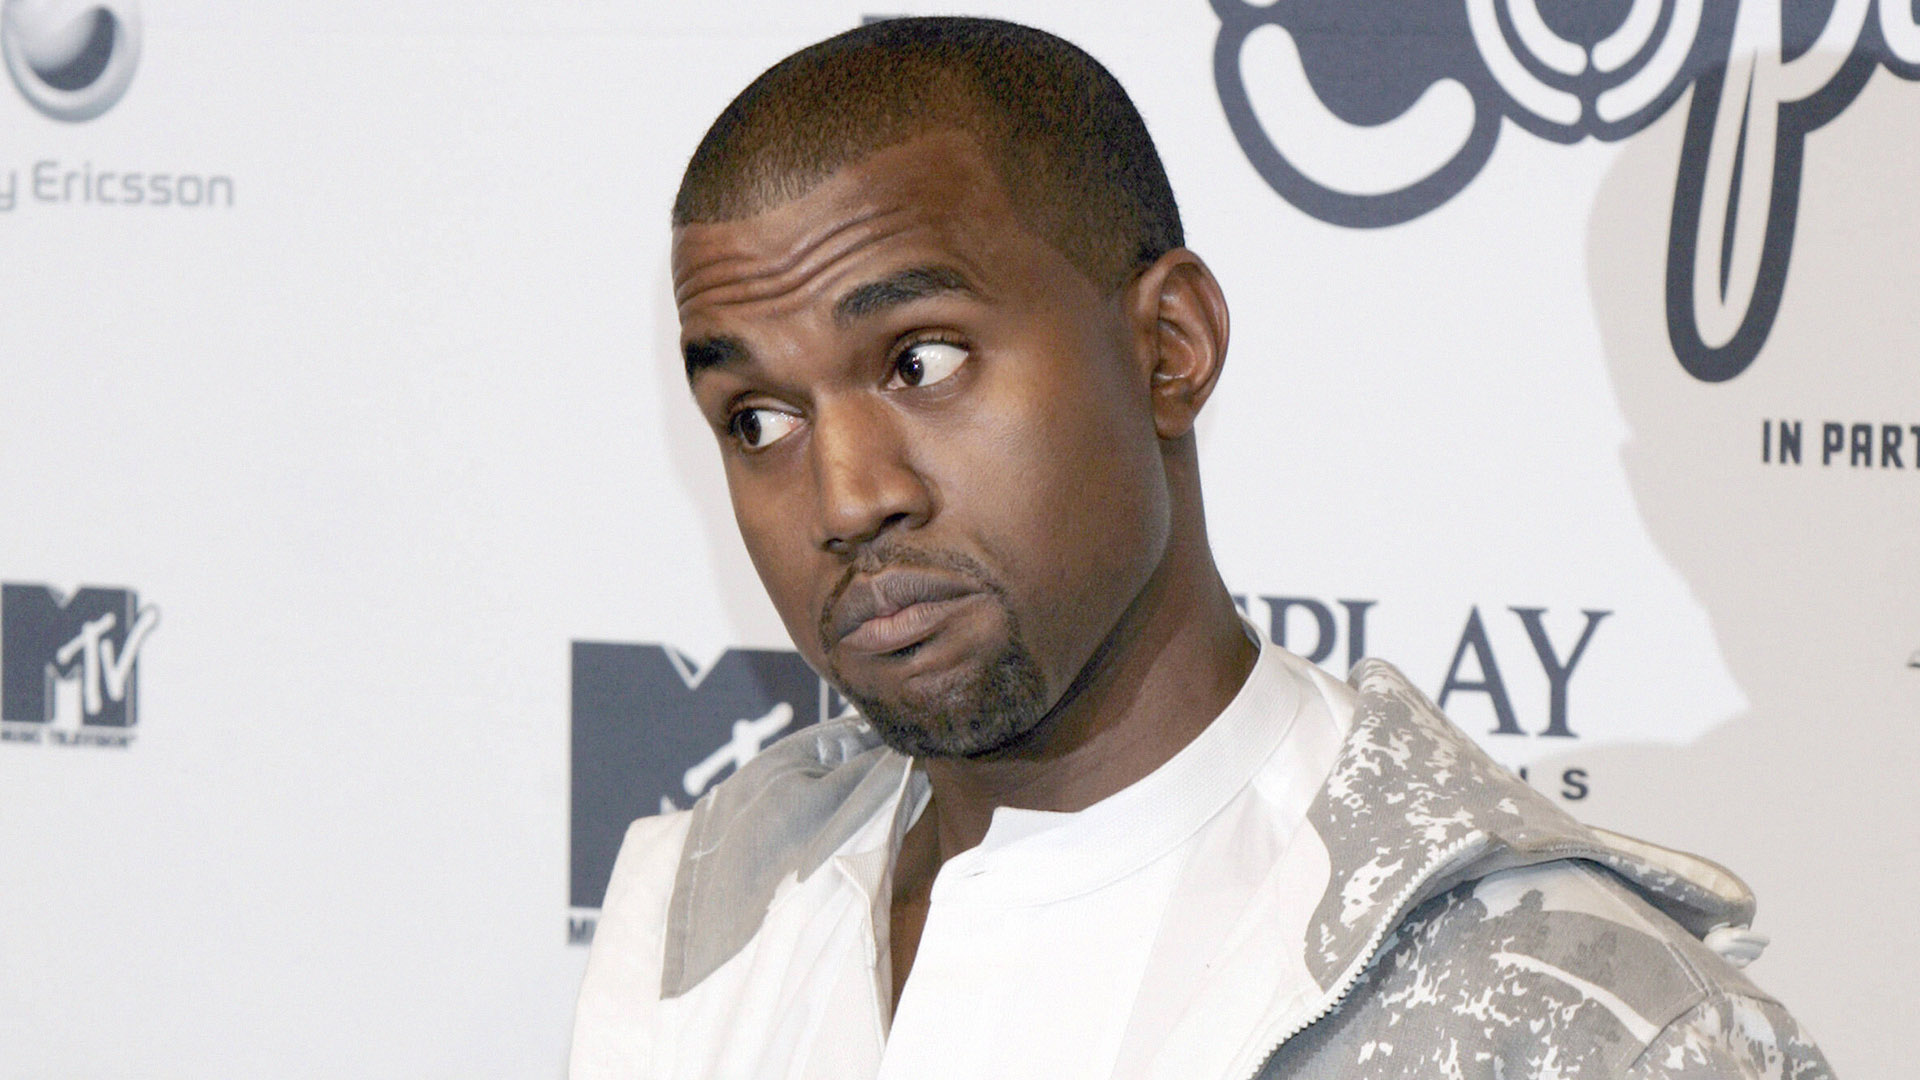 A Little Inappropriate: Kanye West's Scrapped TV Show Pilot Leaks Online